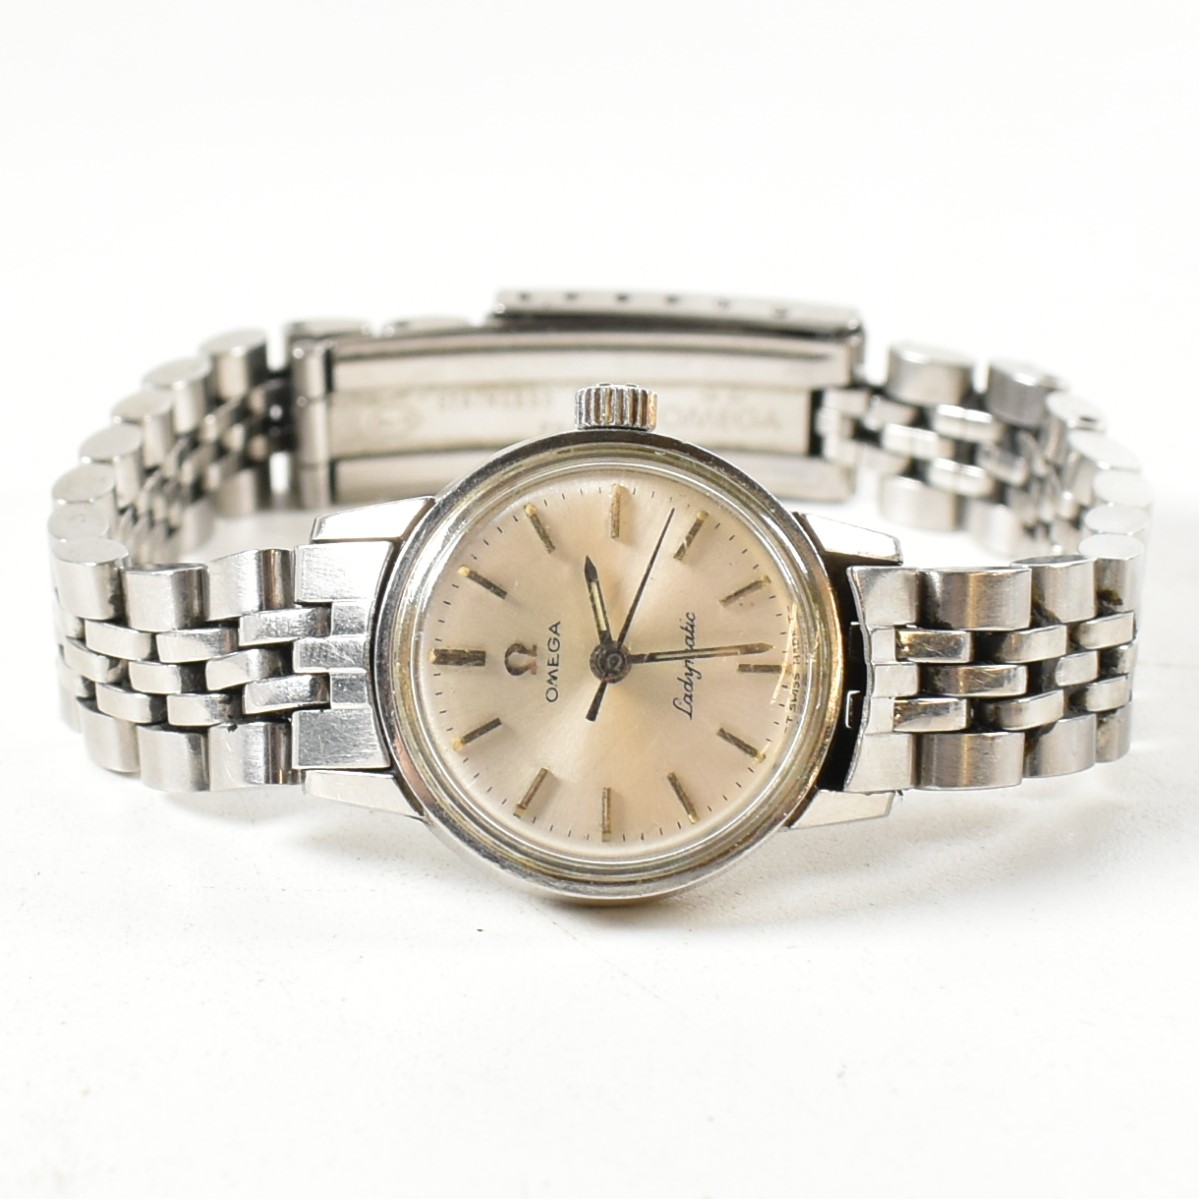 STAINLESS STEEL OMEGA LADYMATIC SEAMASTER WRISTWATCH - Image 4 of 6